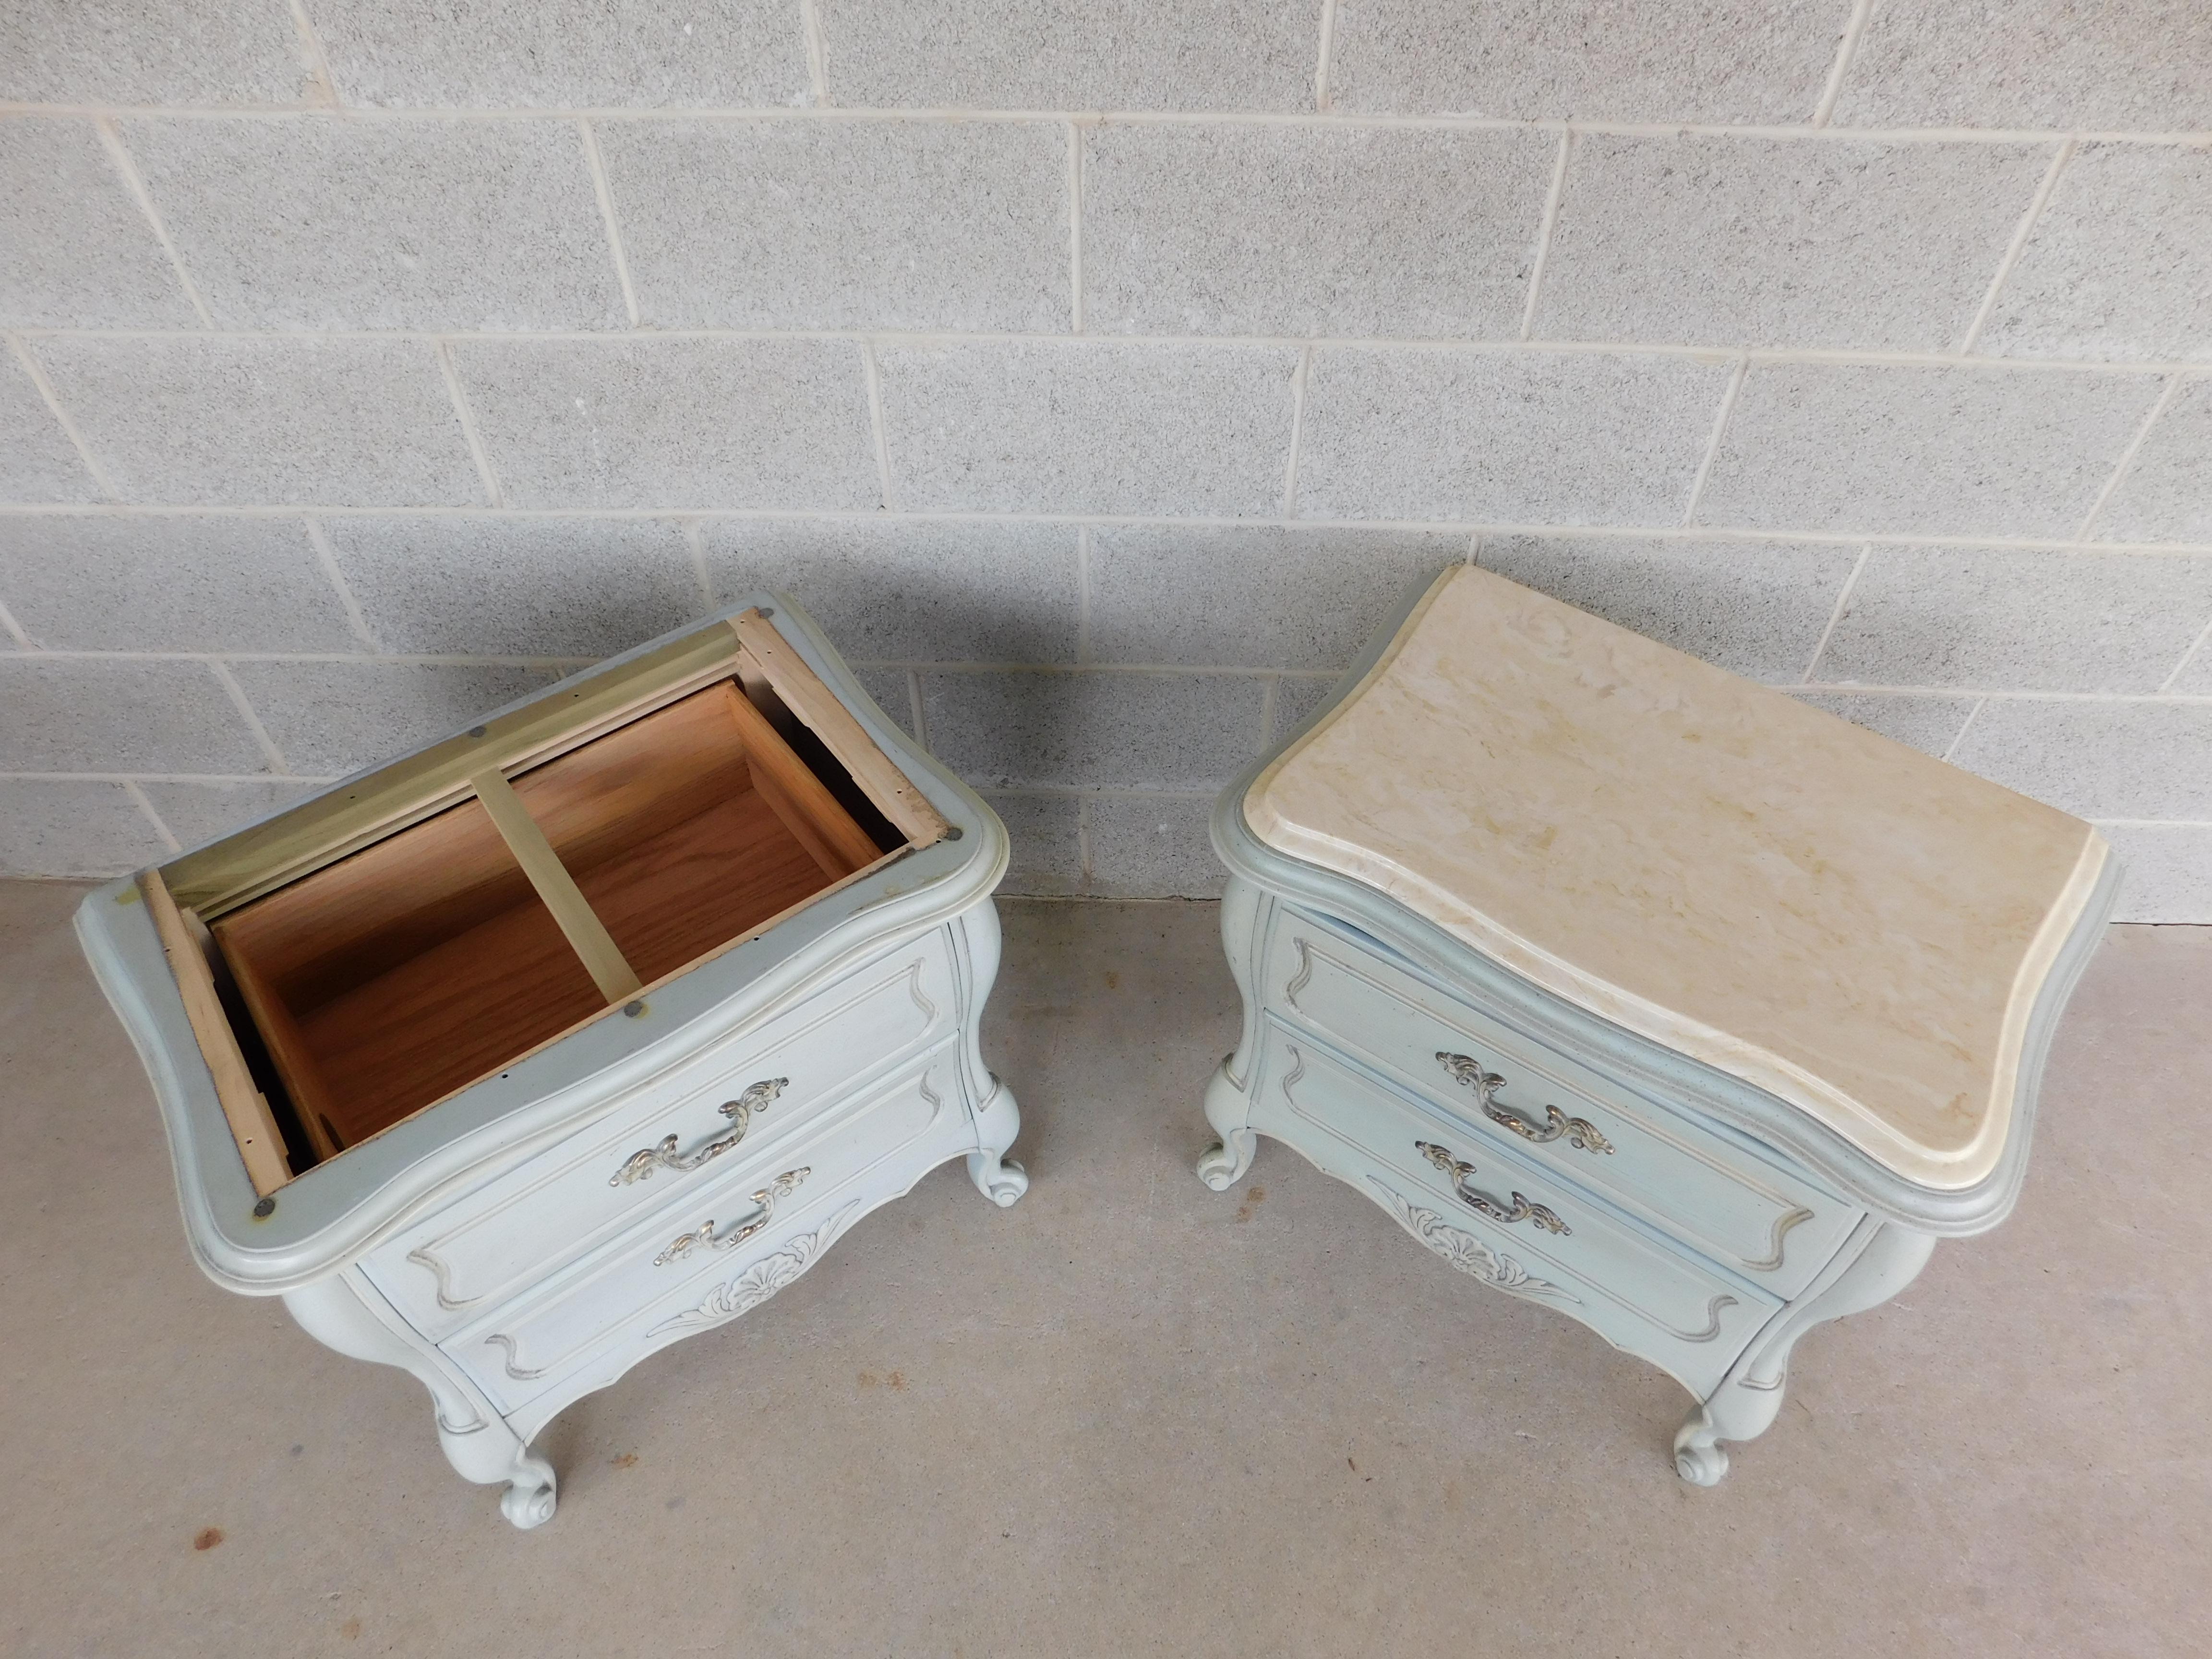 Marble top over original French powder blue finish. Brass pulls on 2 dovetailed drawers.